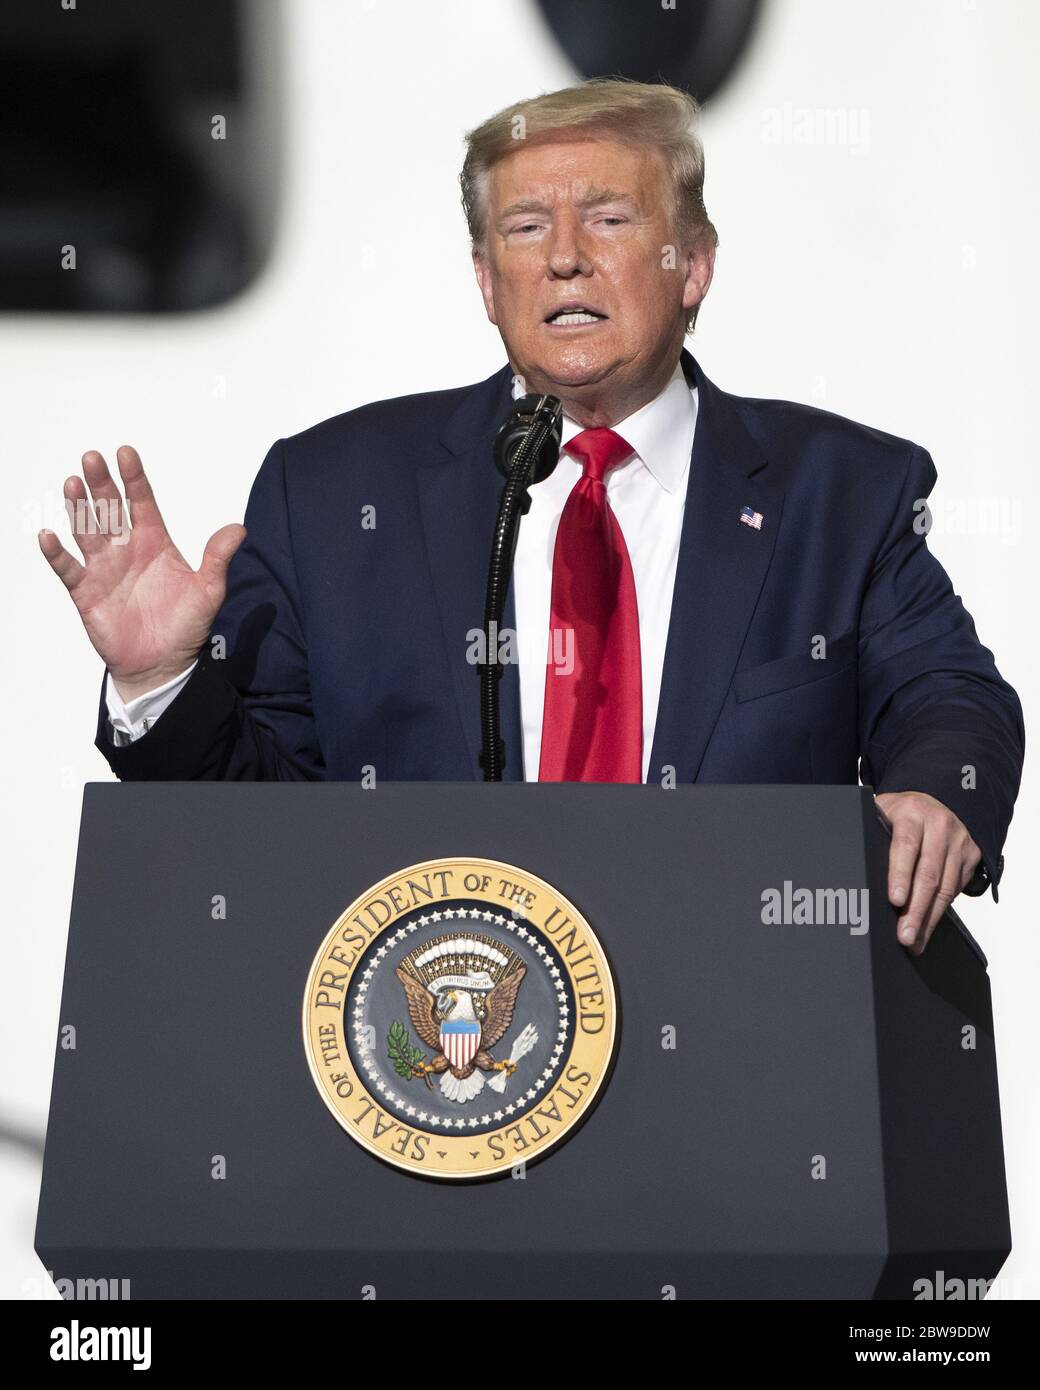 Kennedy Space Center, United States. 30th May, 2020. President Donald Trump makes remarks following the launch of the first crewed NASA/SpaceX mission from the Kennedy Space Center on Saturday May 30, 2020. Photo by Joe Marino/UPI Credit: UPI/Alamy Live News Stock Photo